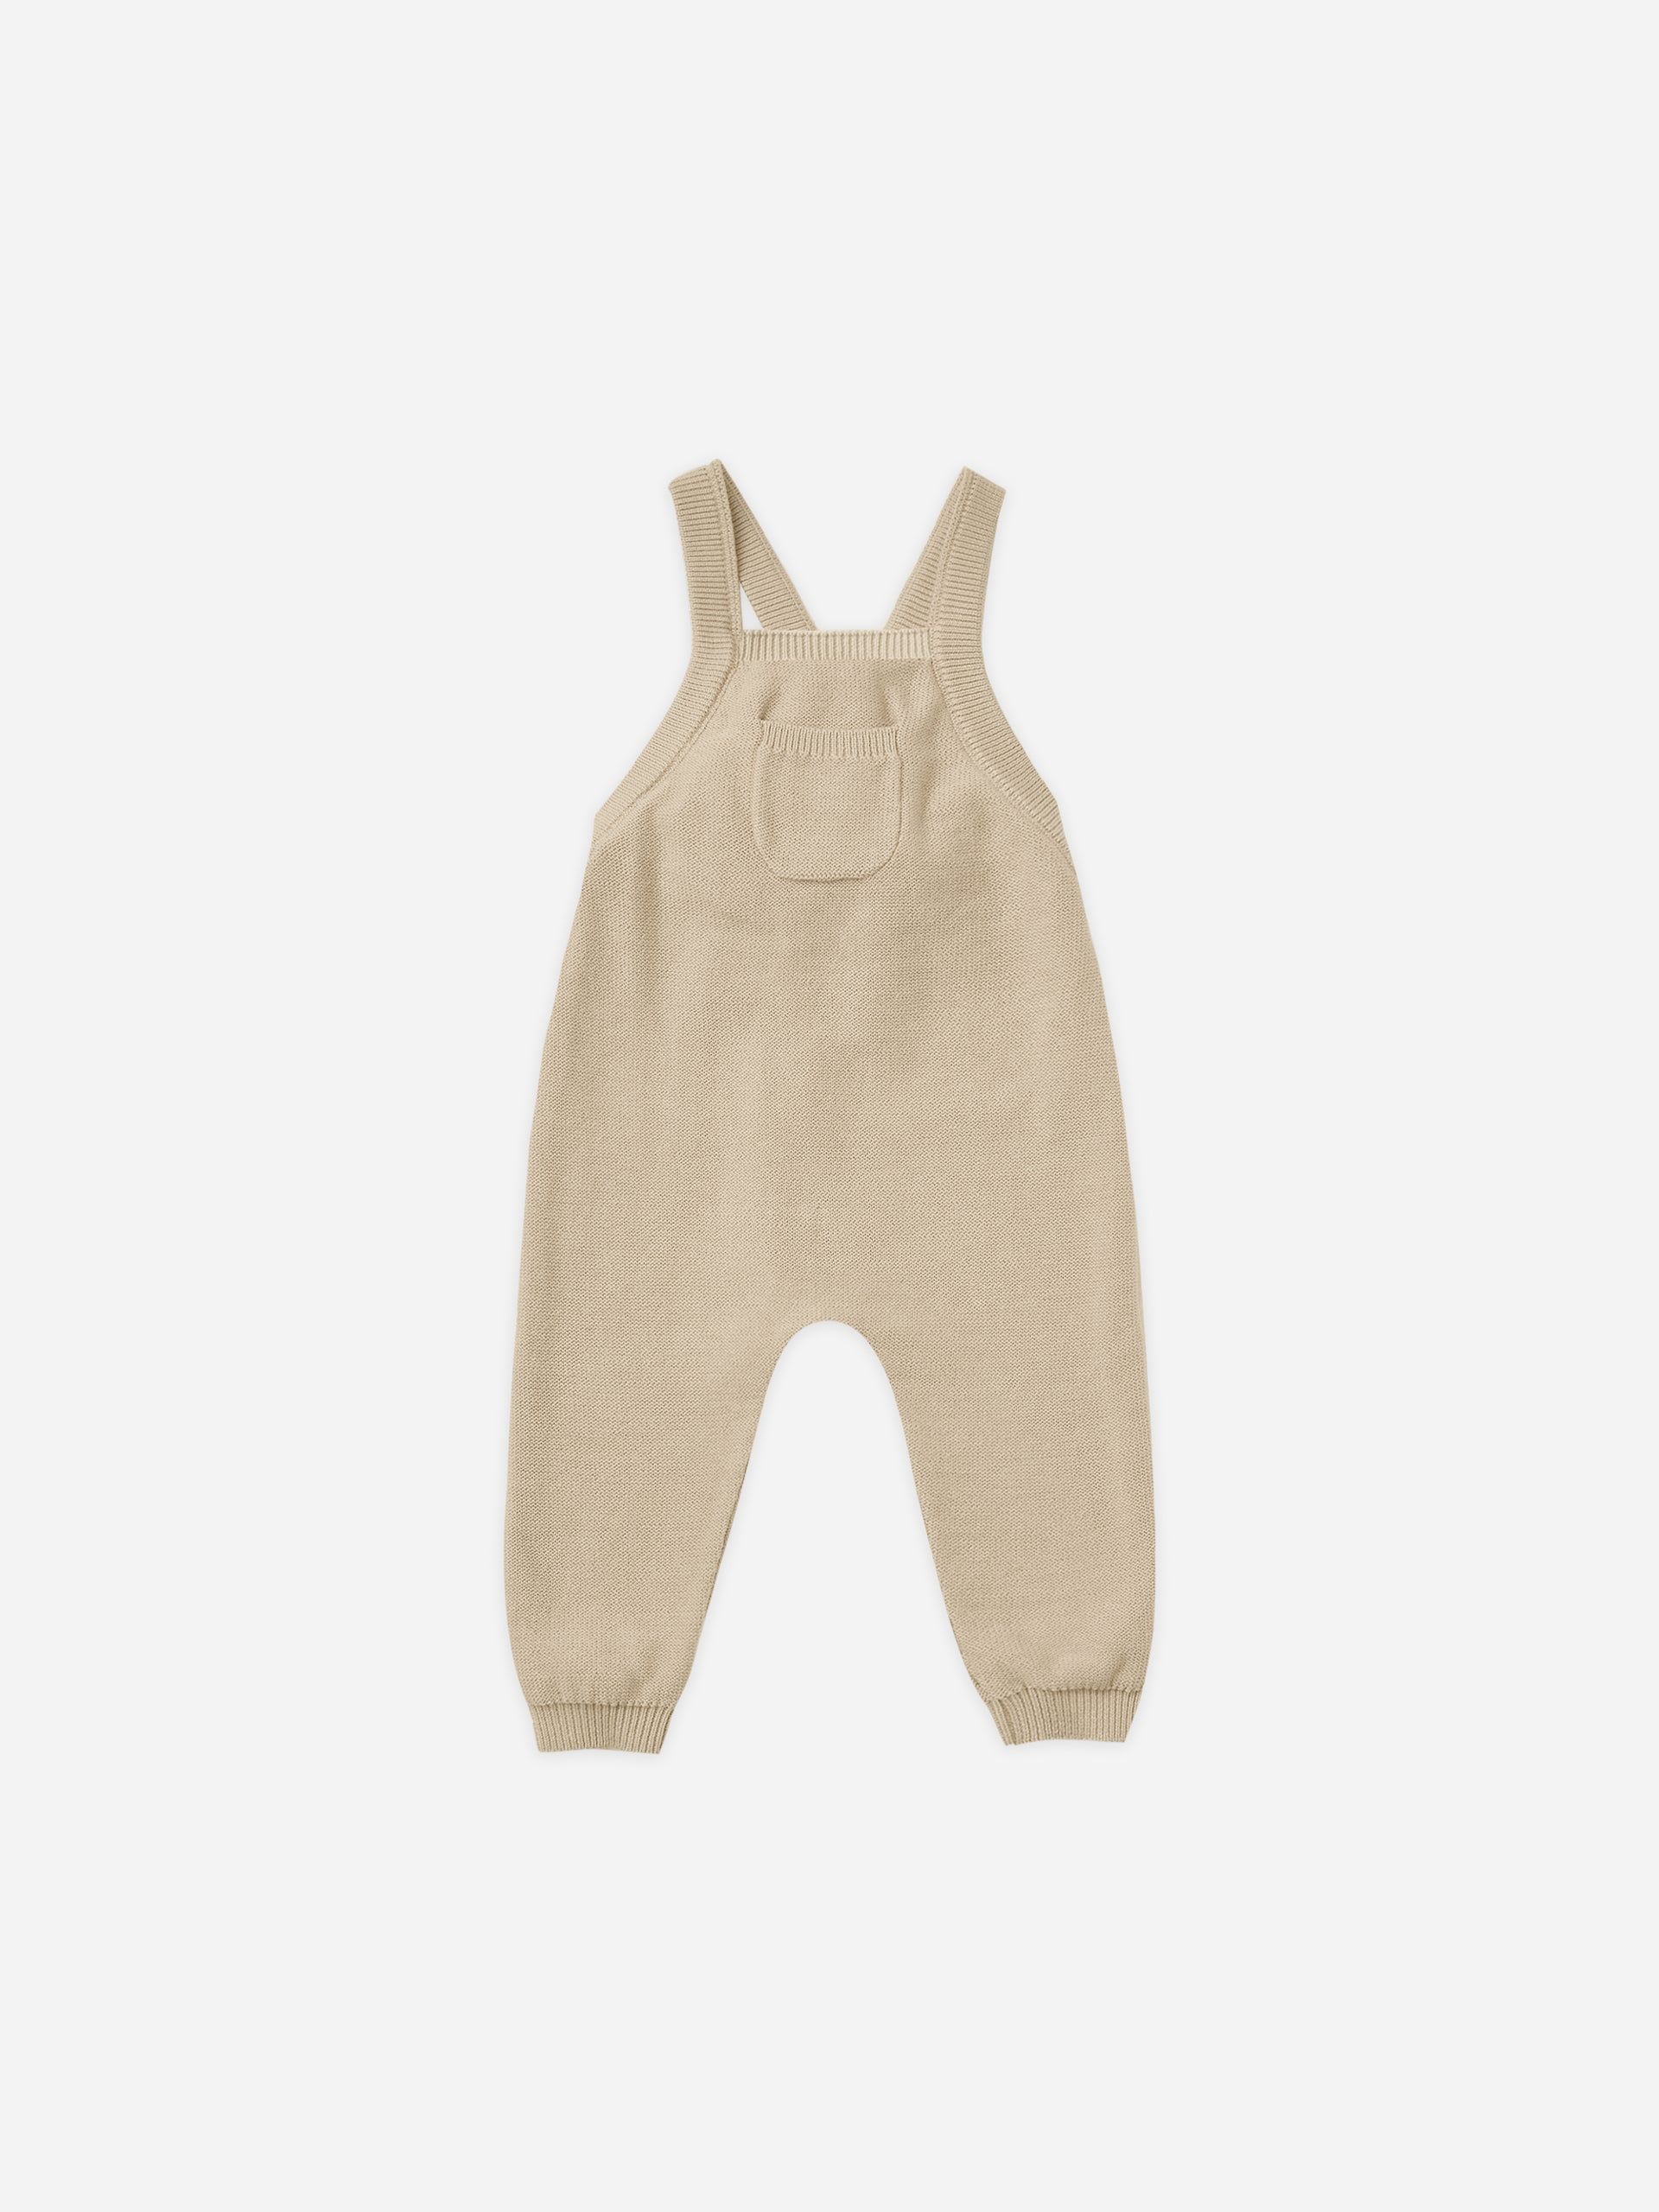 Knit Overall || Sand | Rylee + Cru